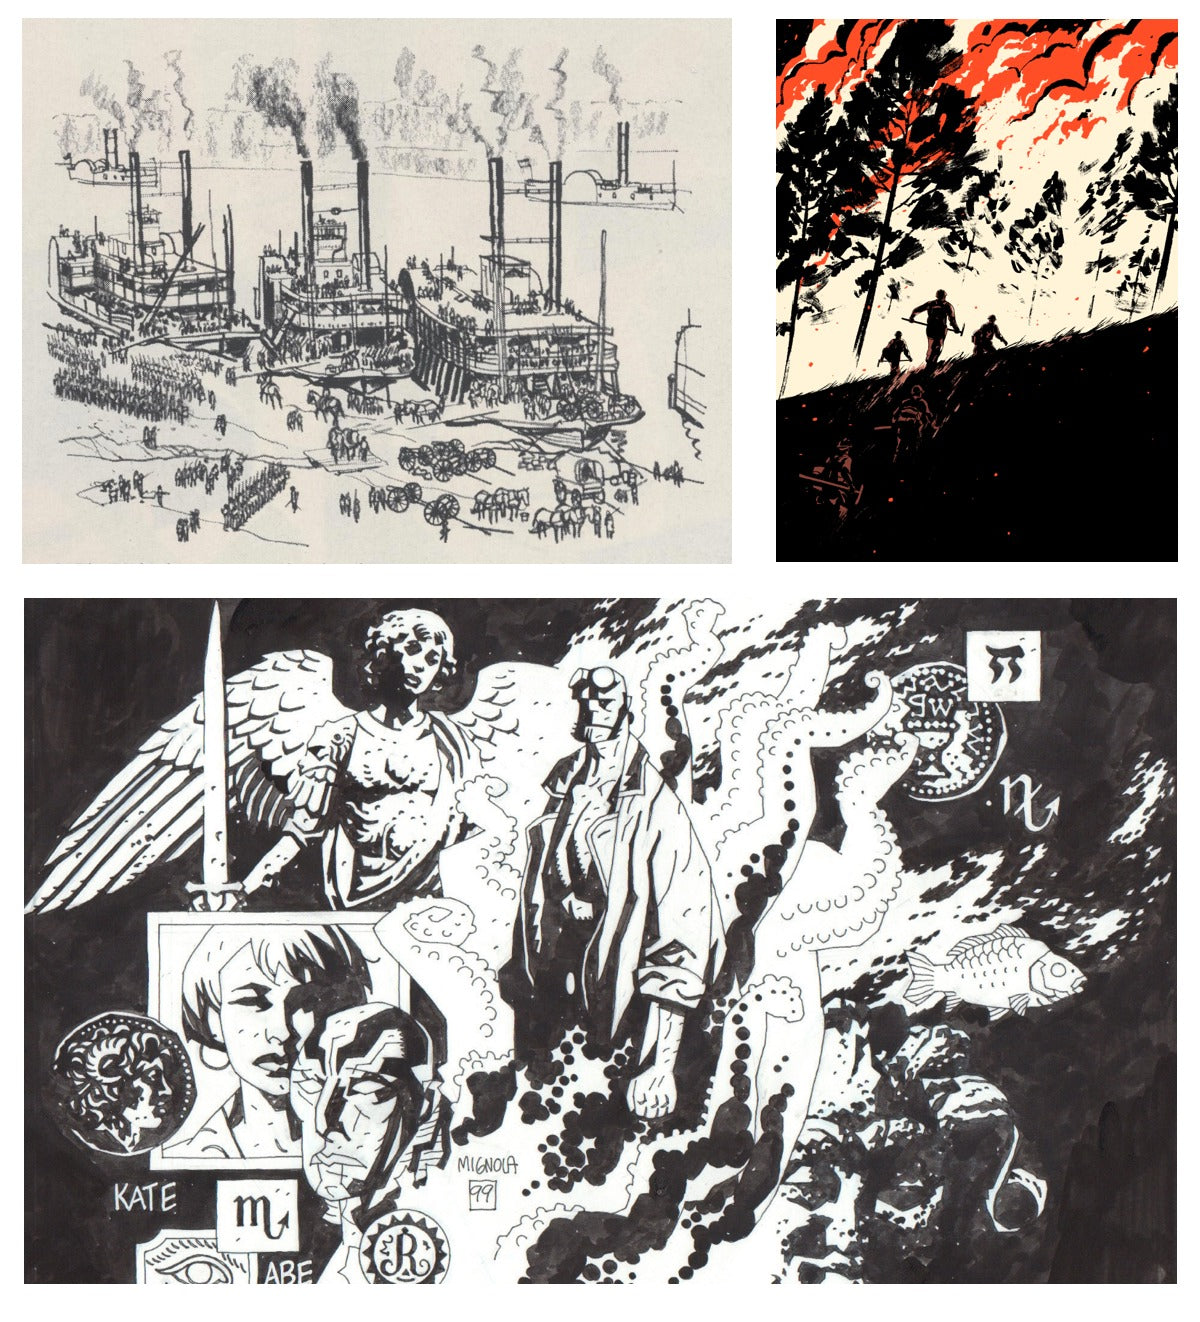 Illustrations by (top left) Noel Sickles; (top right) Patrick Leger; (bottom) Mike Mignola.